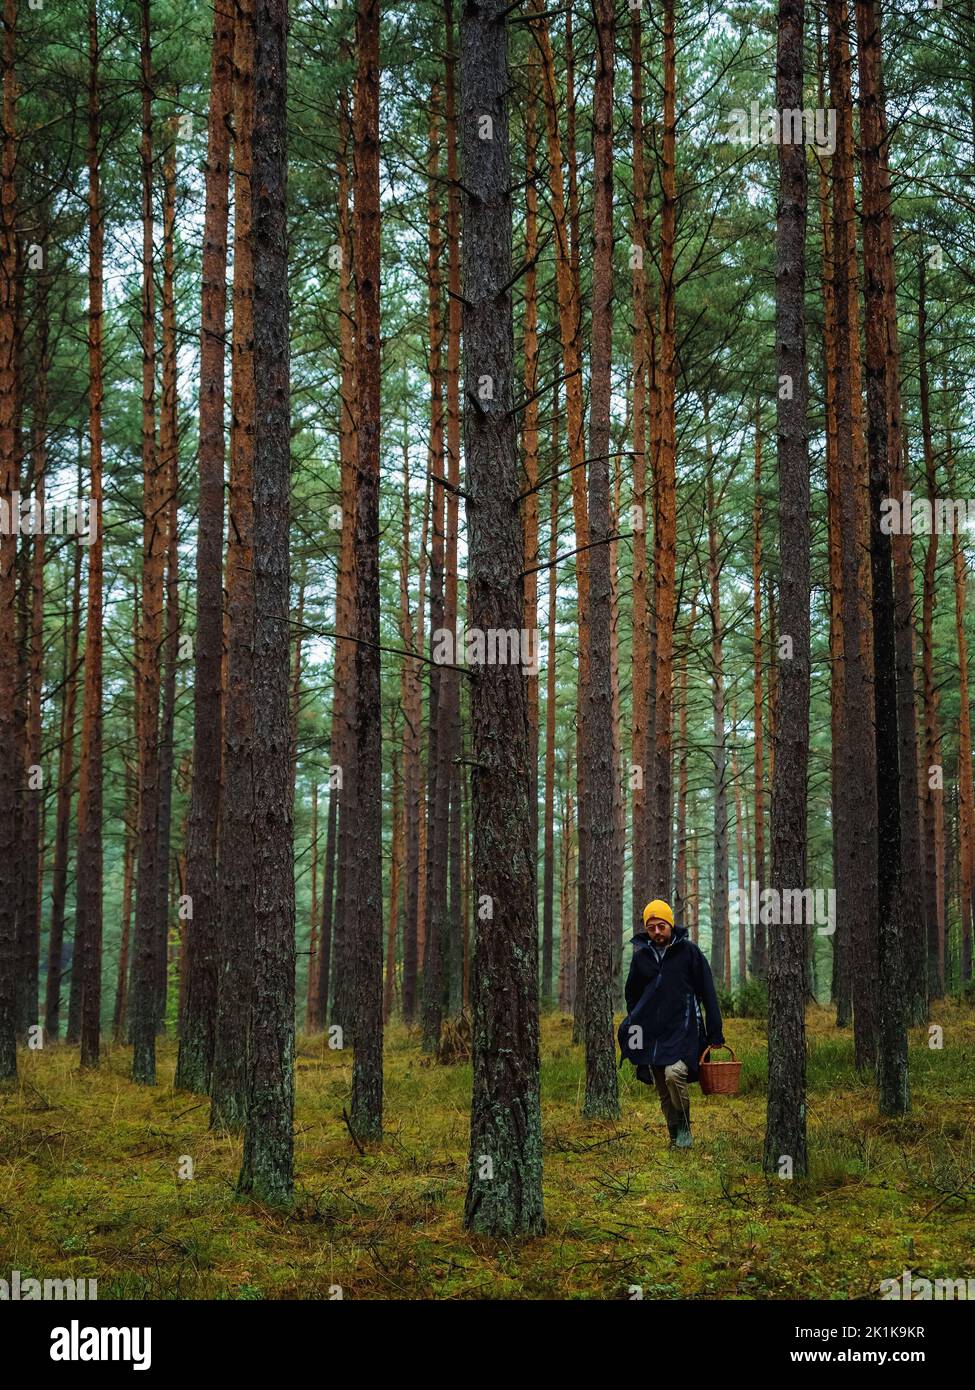 one person searching for a mushrooms in an autumn deep forest. mushroomer in a woods Stock Photo